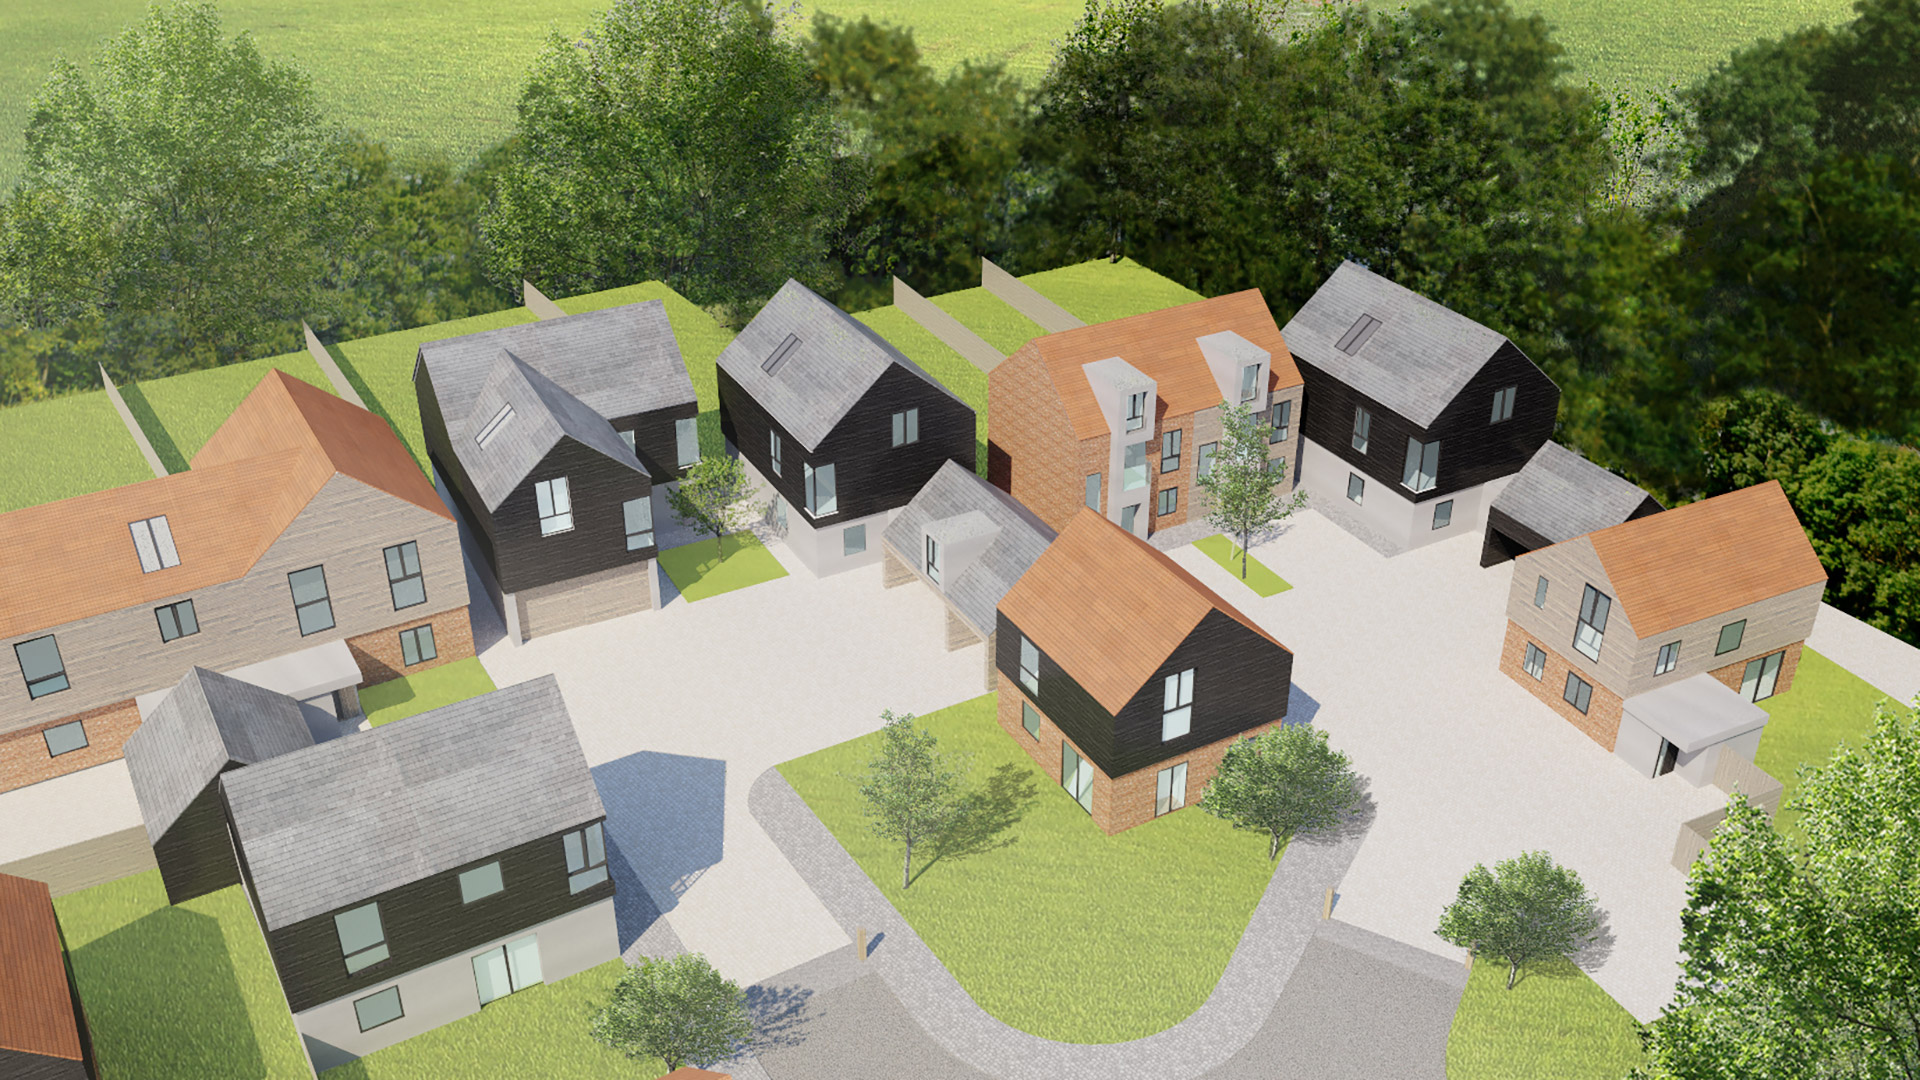 Visual aerial view for new contemporary housing